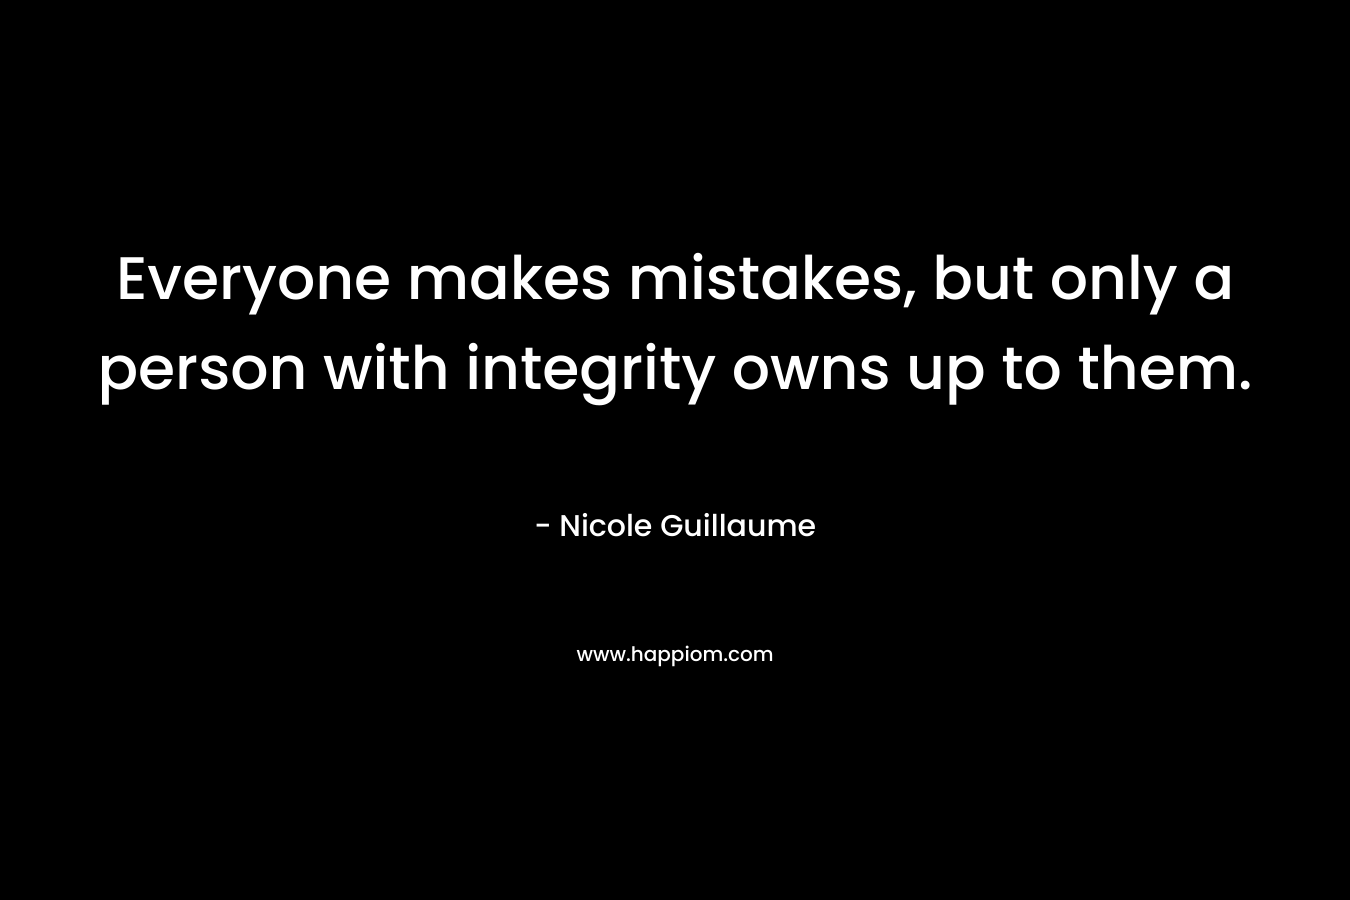 Everyone makes mistakes, but only a person with integrity owns up to them. – Nicole Guillaume